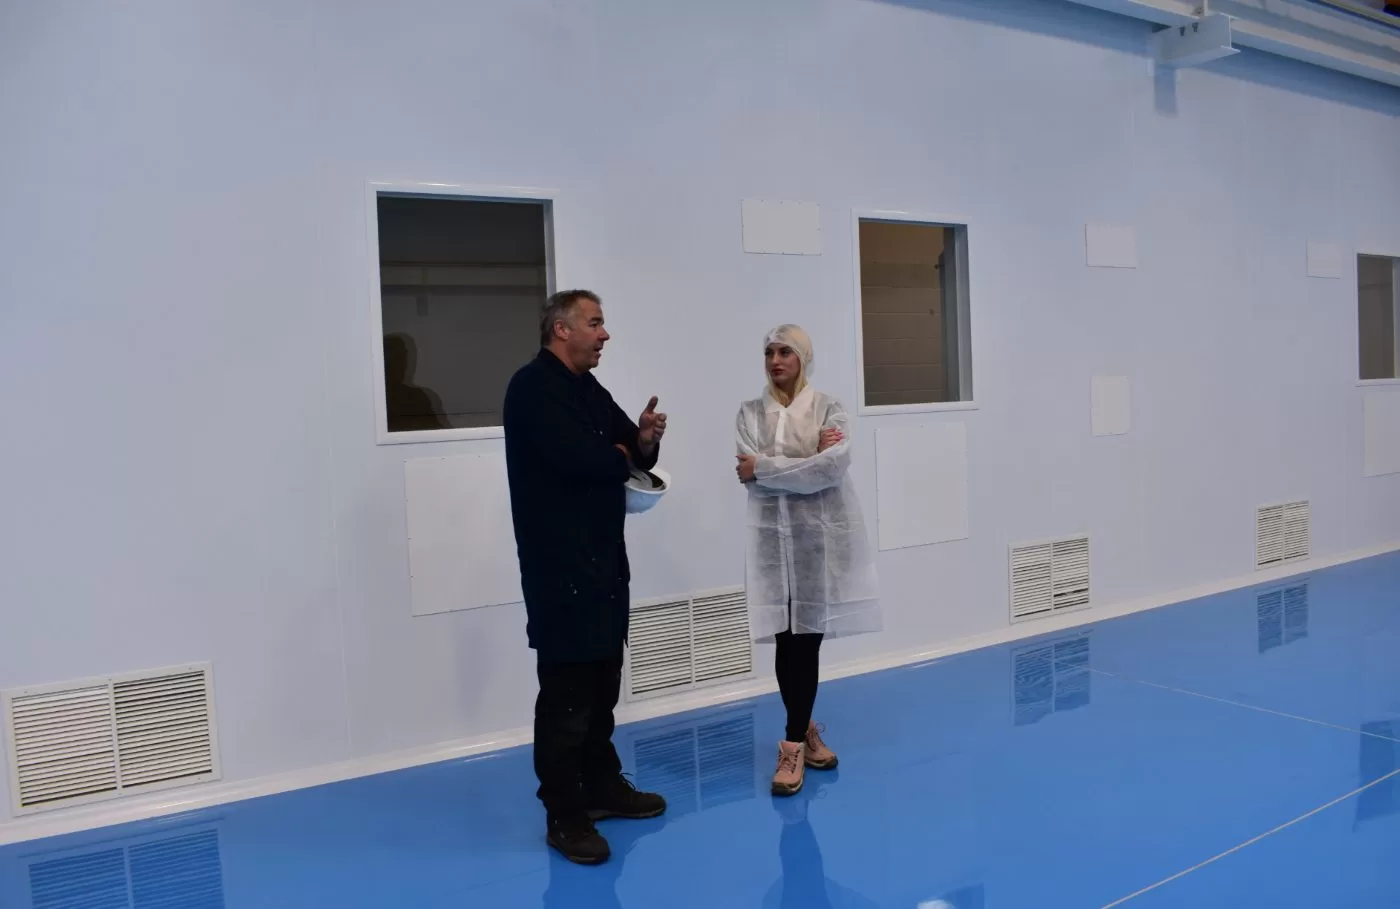 Two people in large room with blue flooring